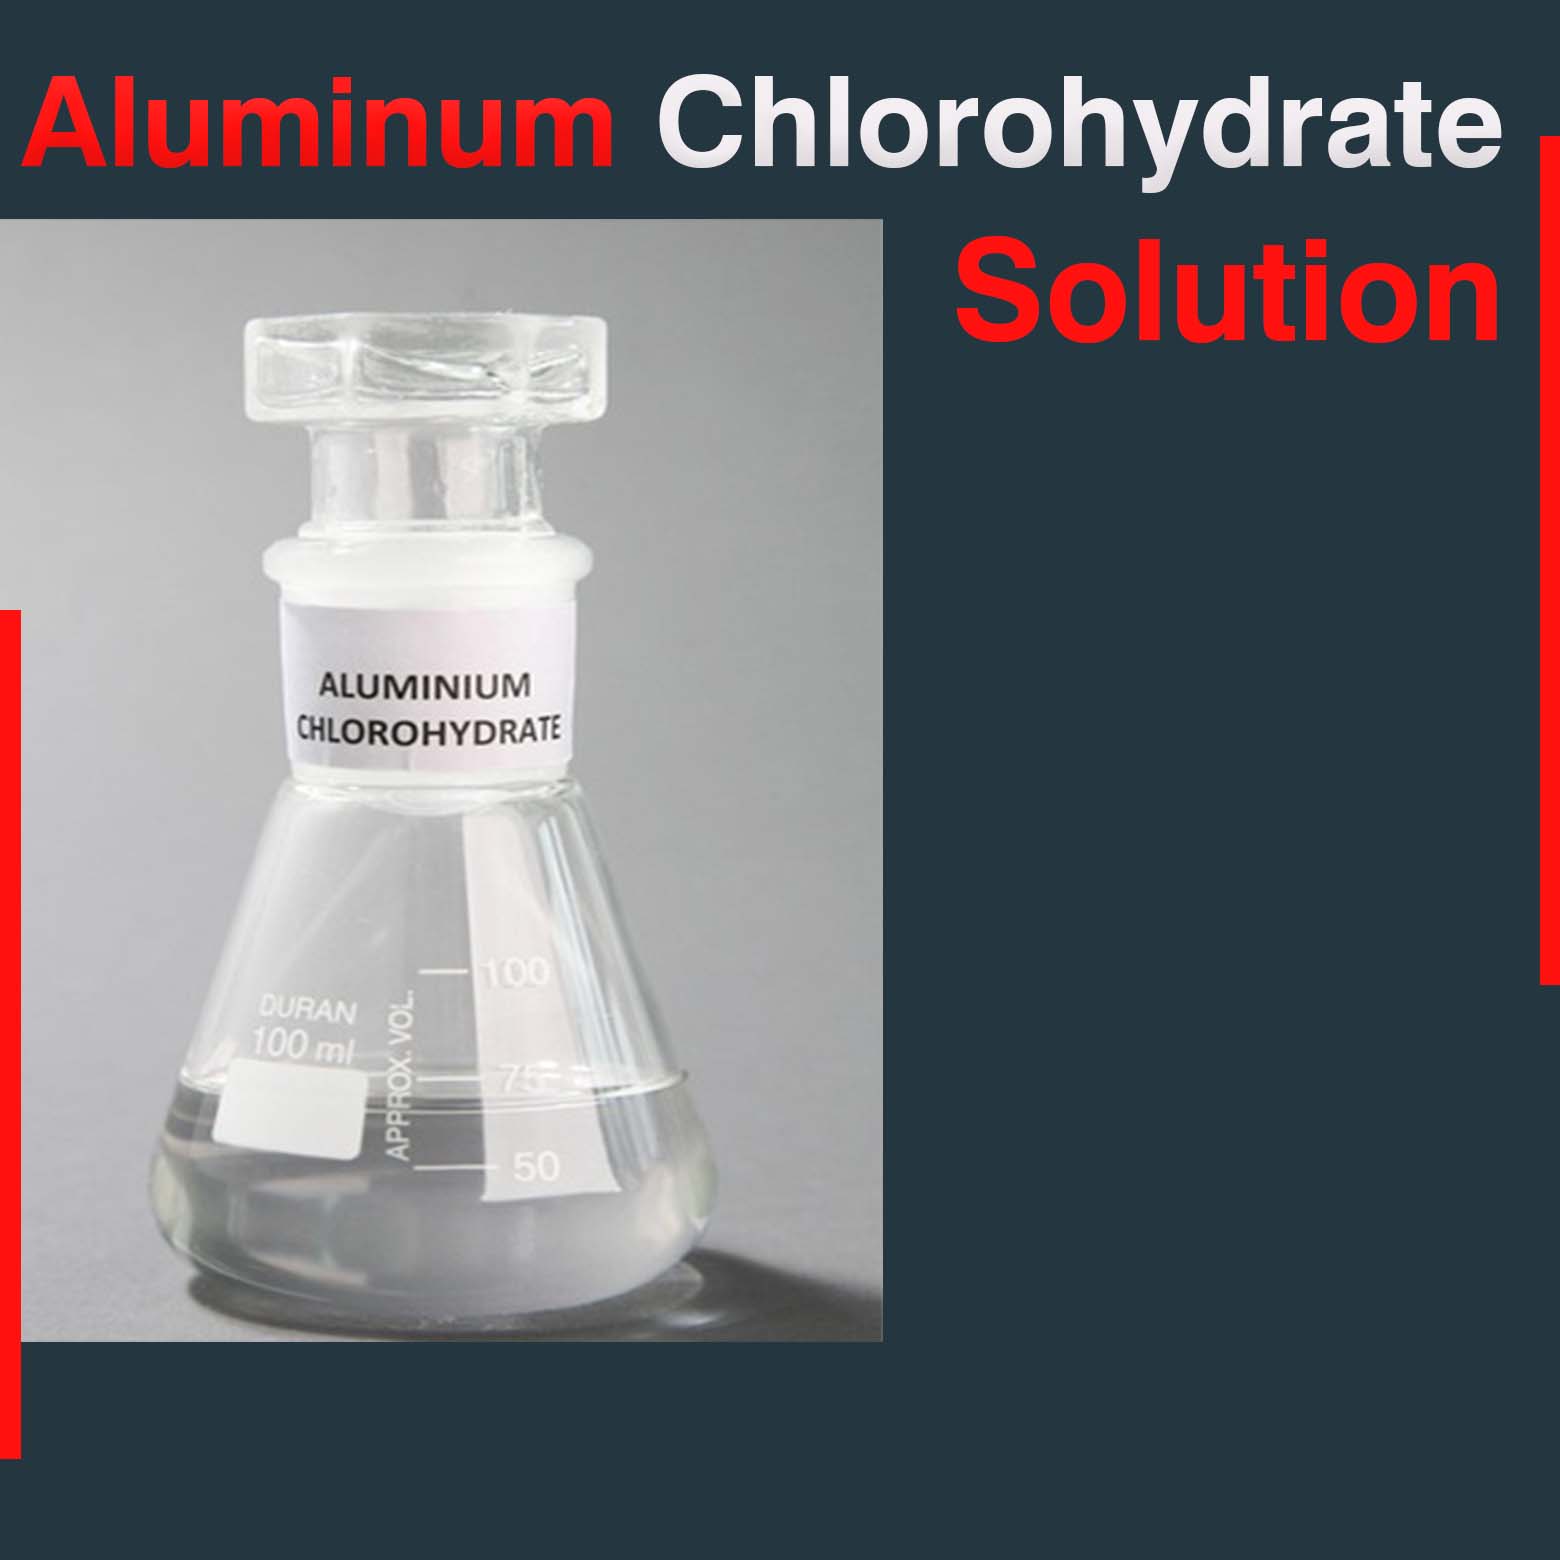 Aluminum Chlorohydrate Solution In Charleroi